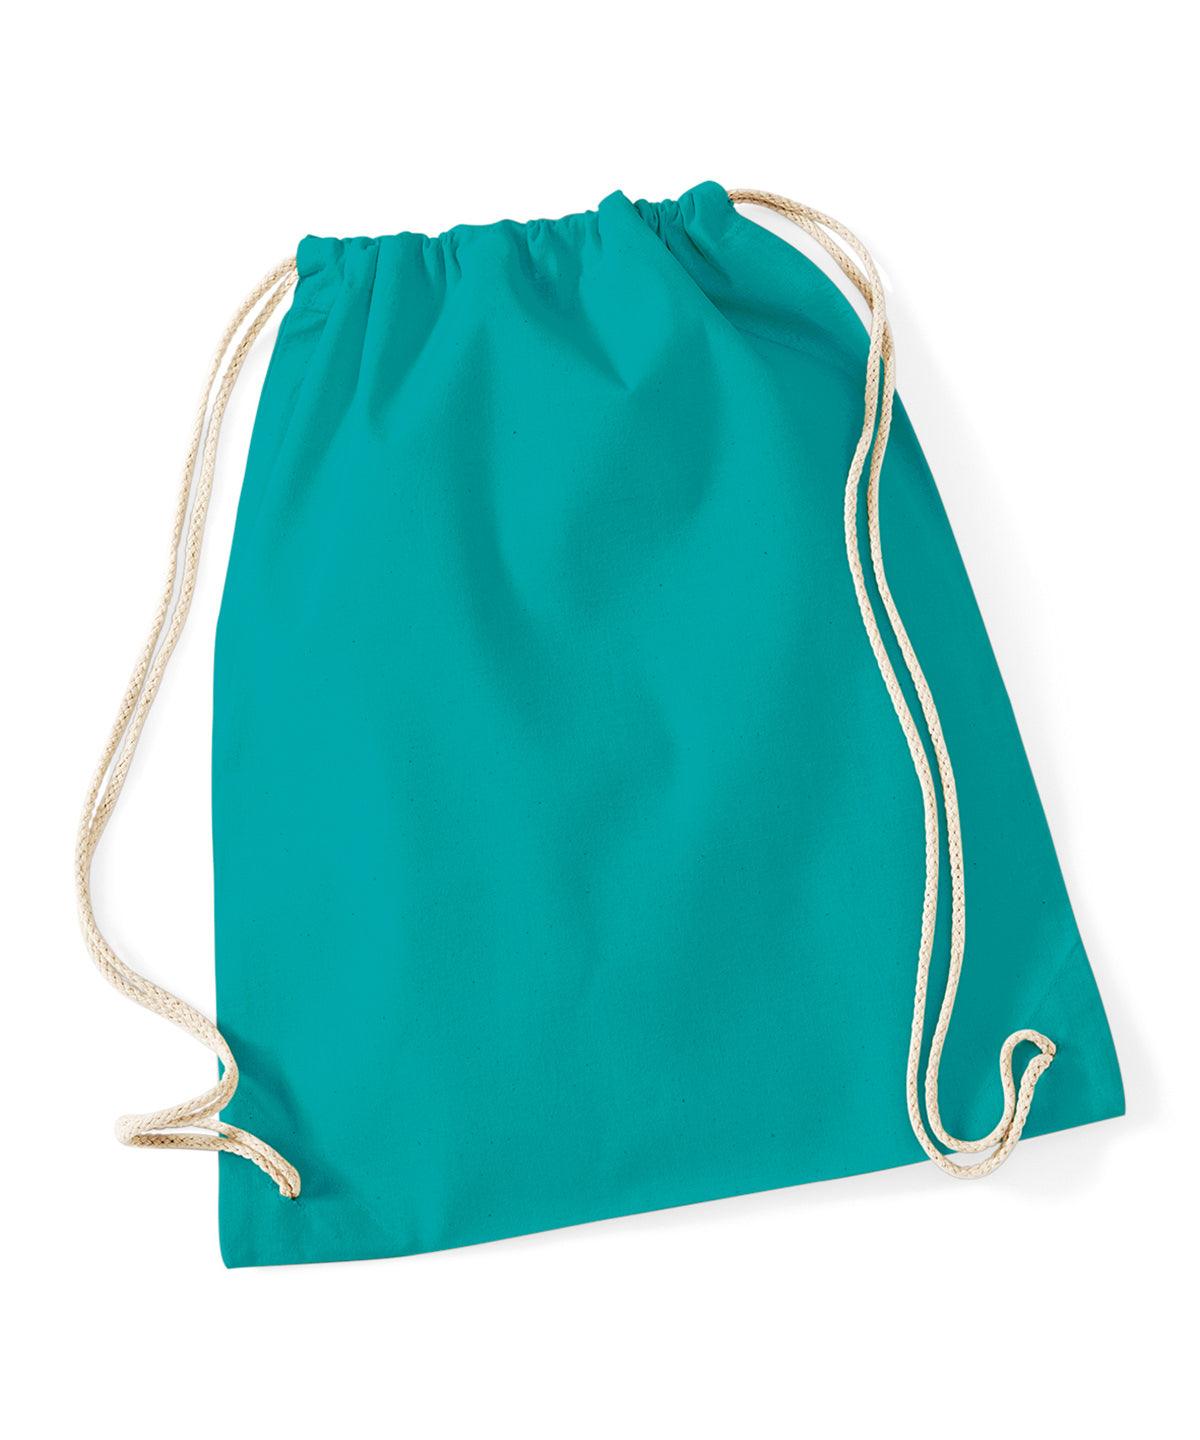 Emerald - Cotton gymsac Bags Westford Mill Bags & Luggage, Junior, Must Haves, Pastels and Tie Dye Schoolwear Centres